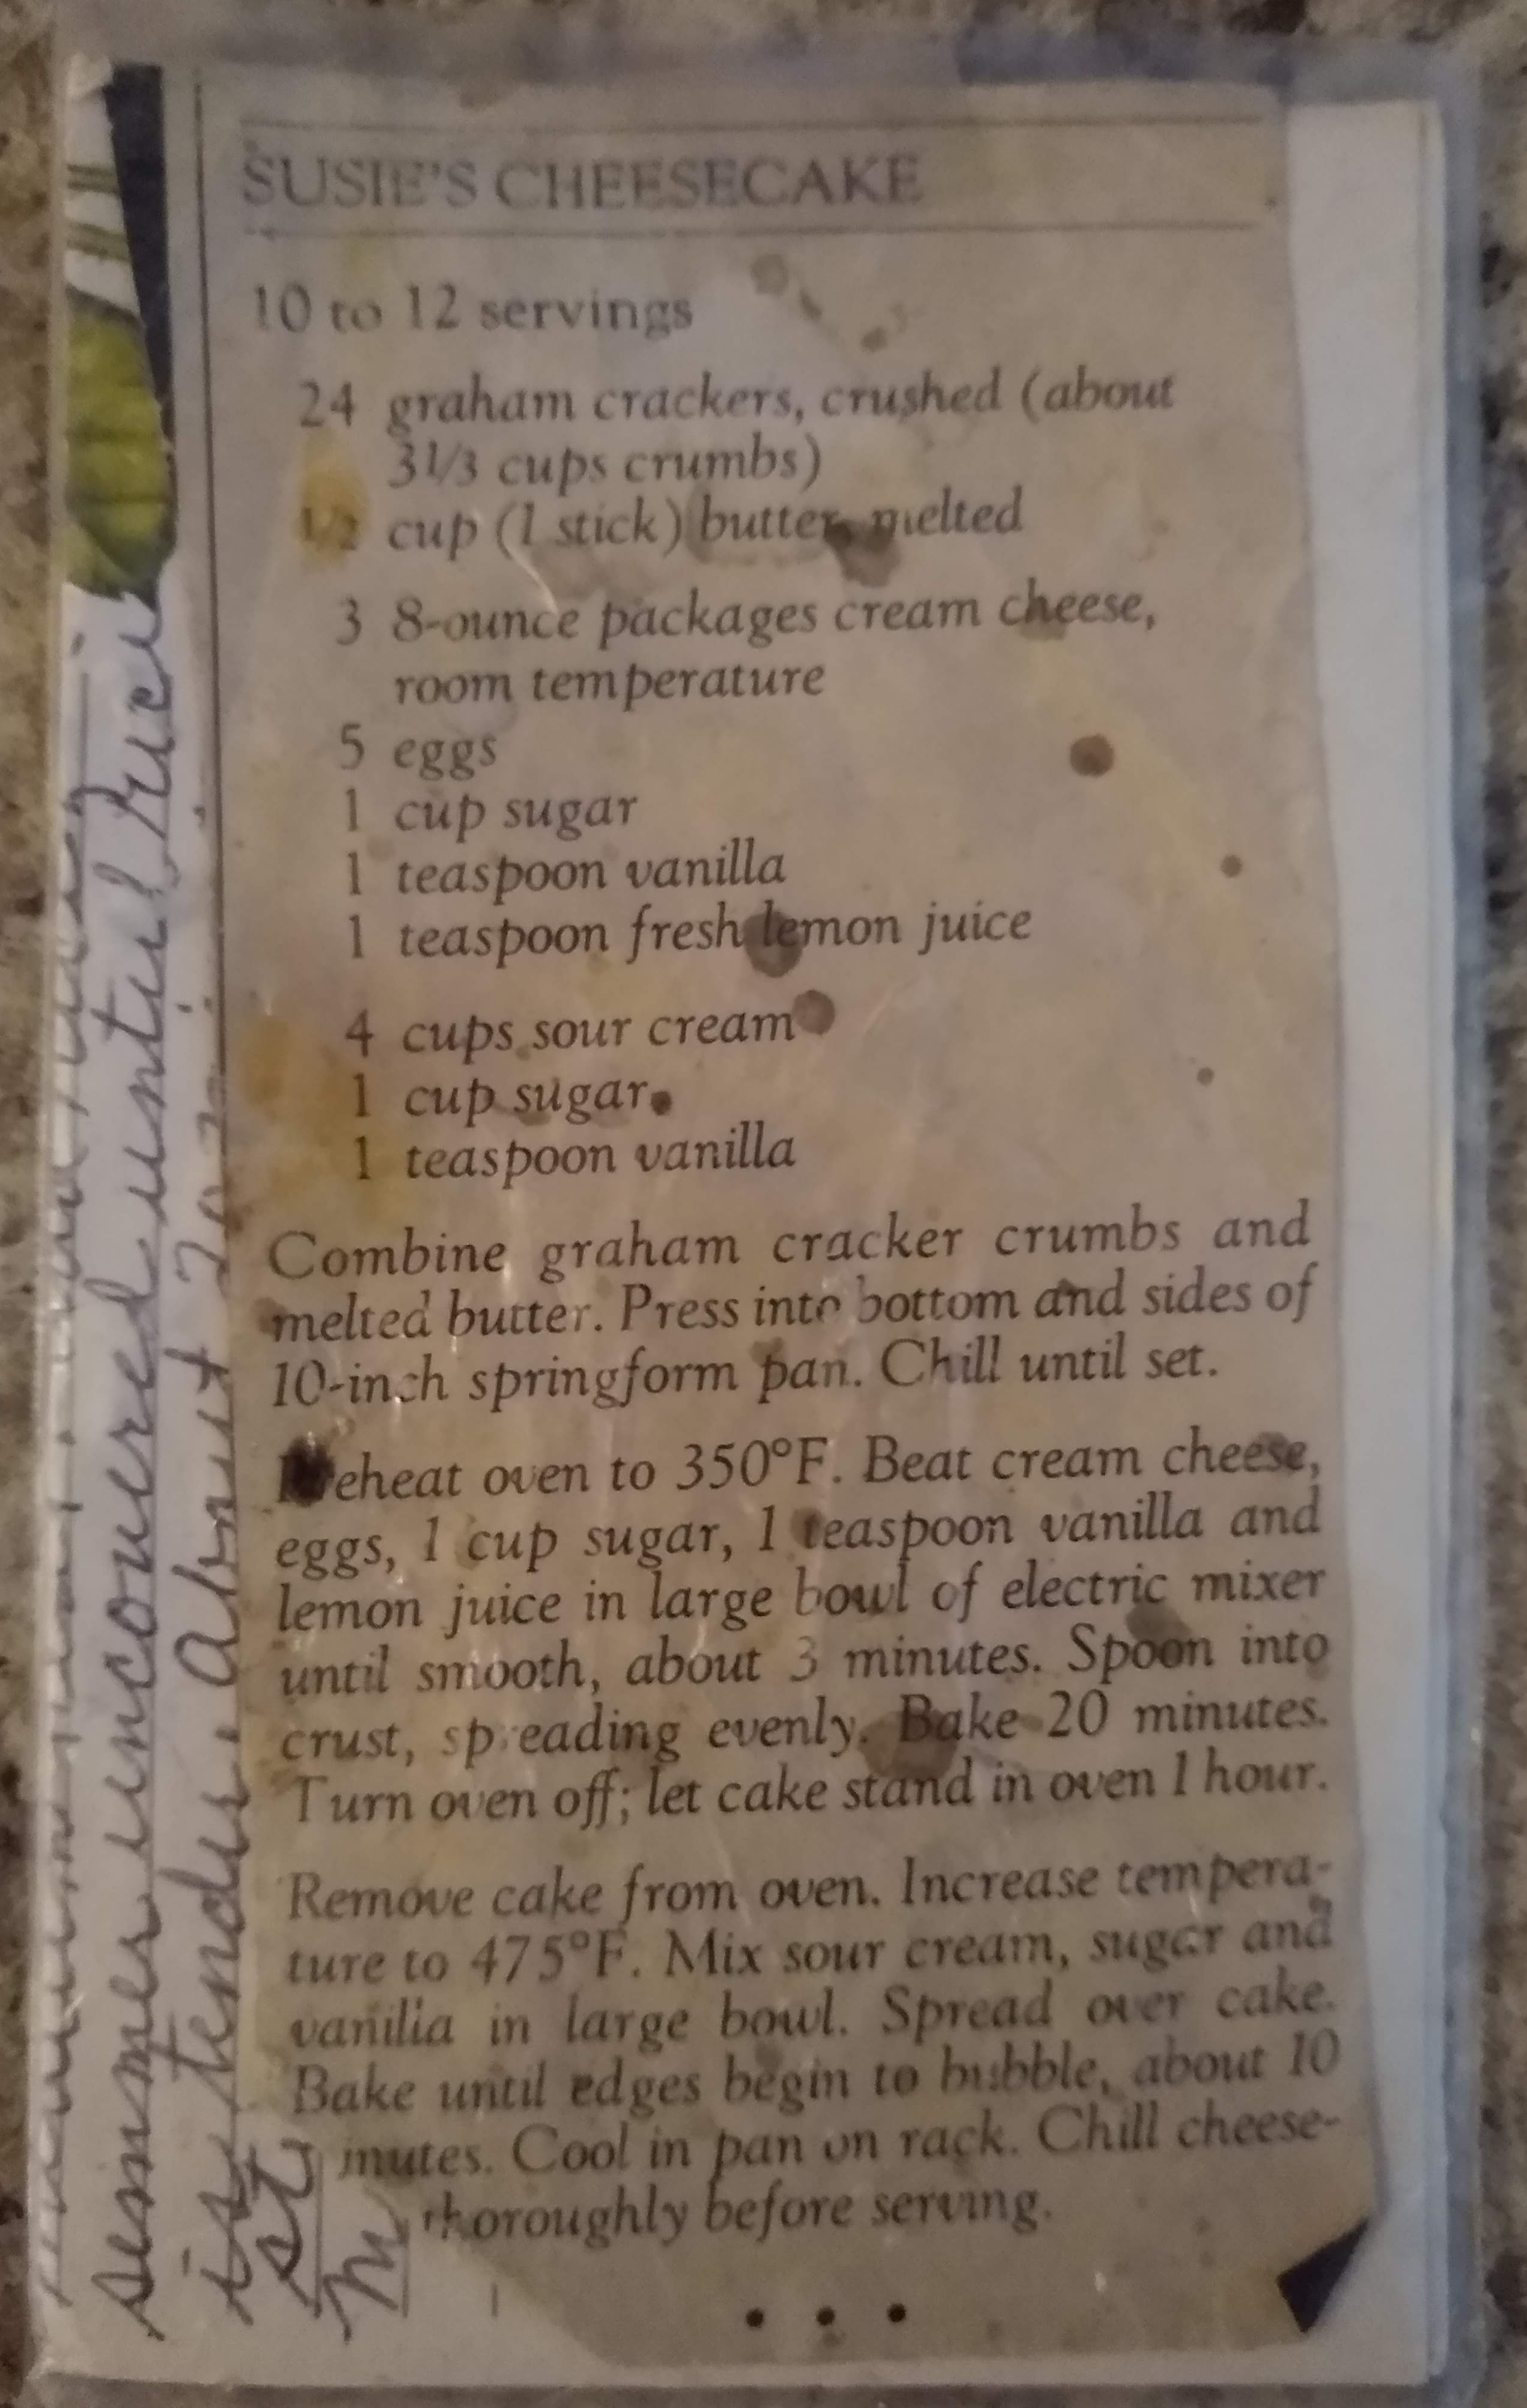 A photo of the cheesecake recipe my mom's is based on. It's on magazine paper that's yellowed & stained.